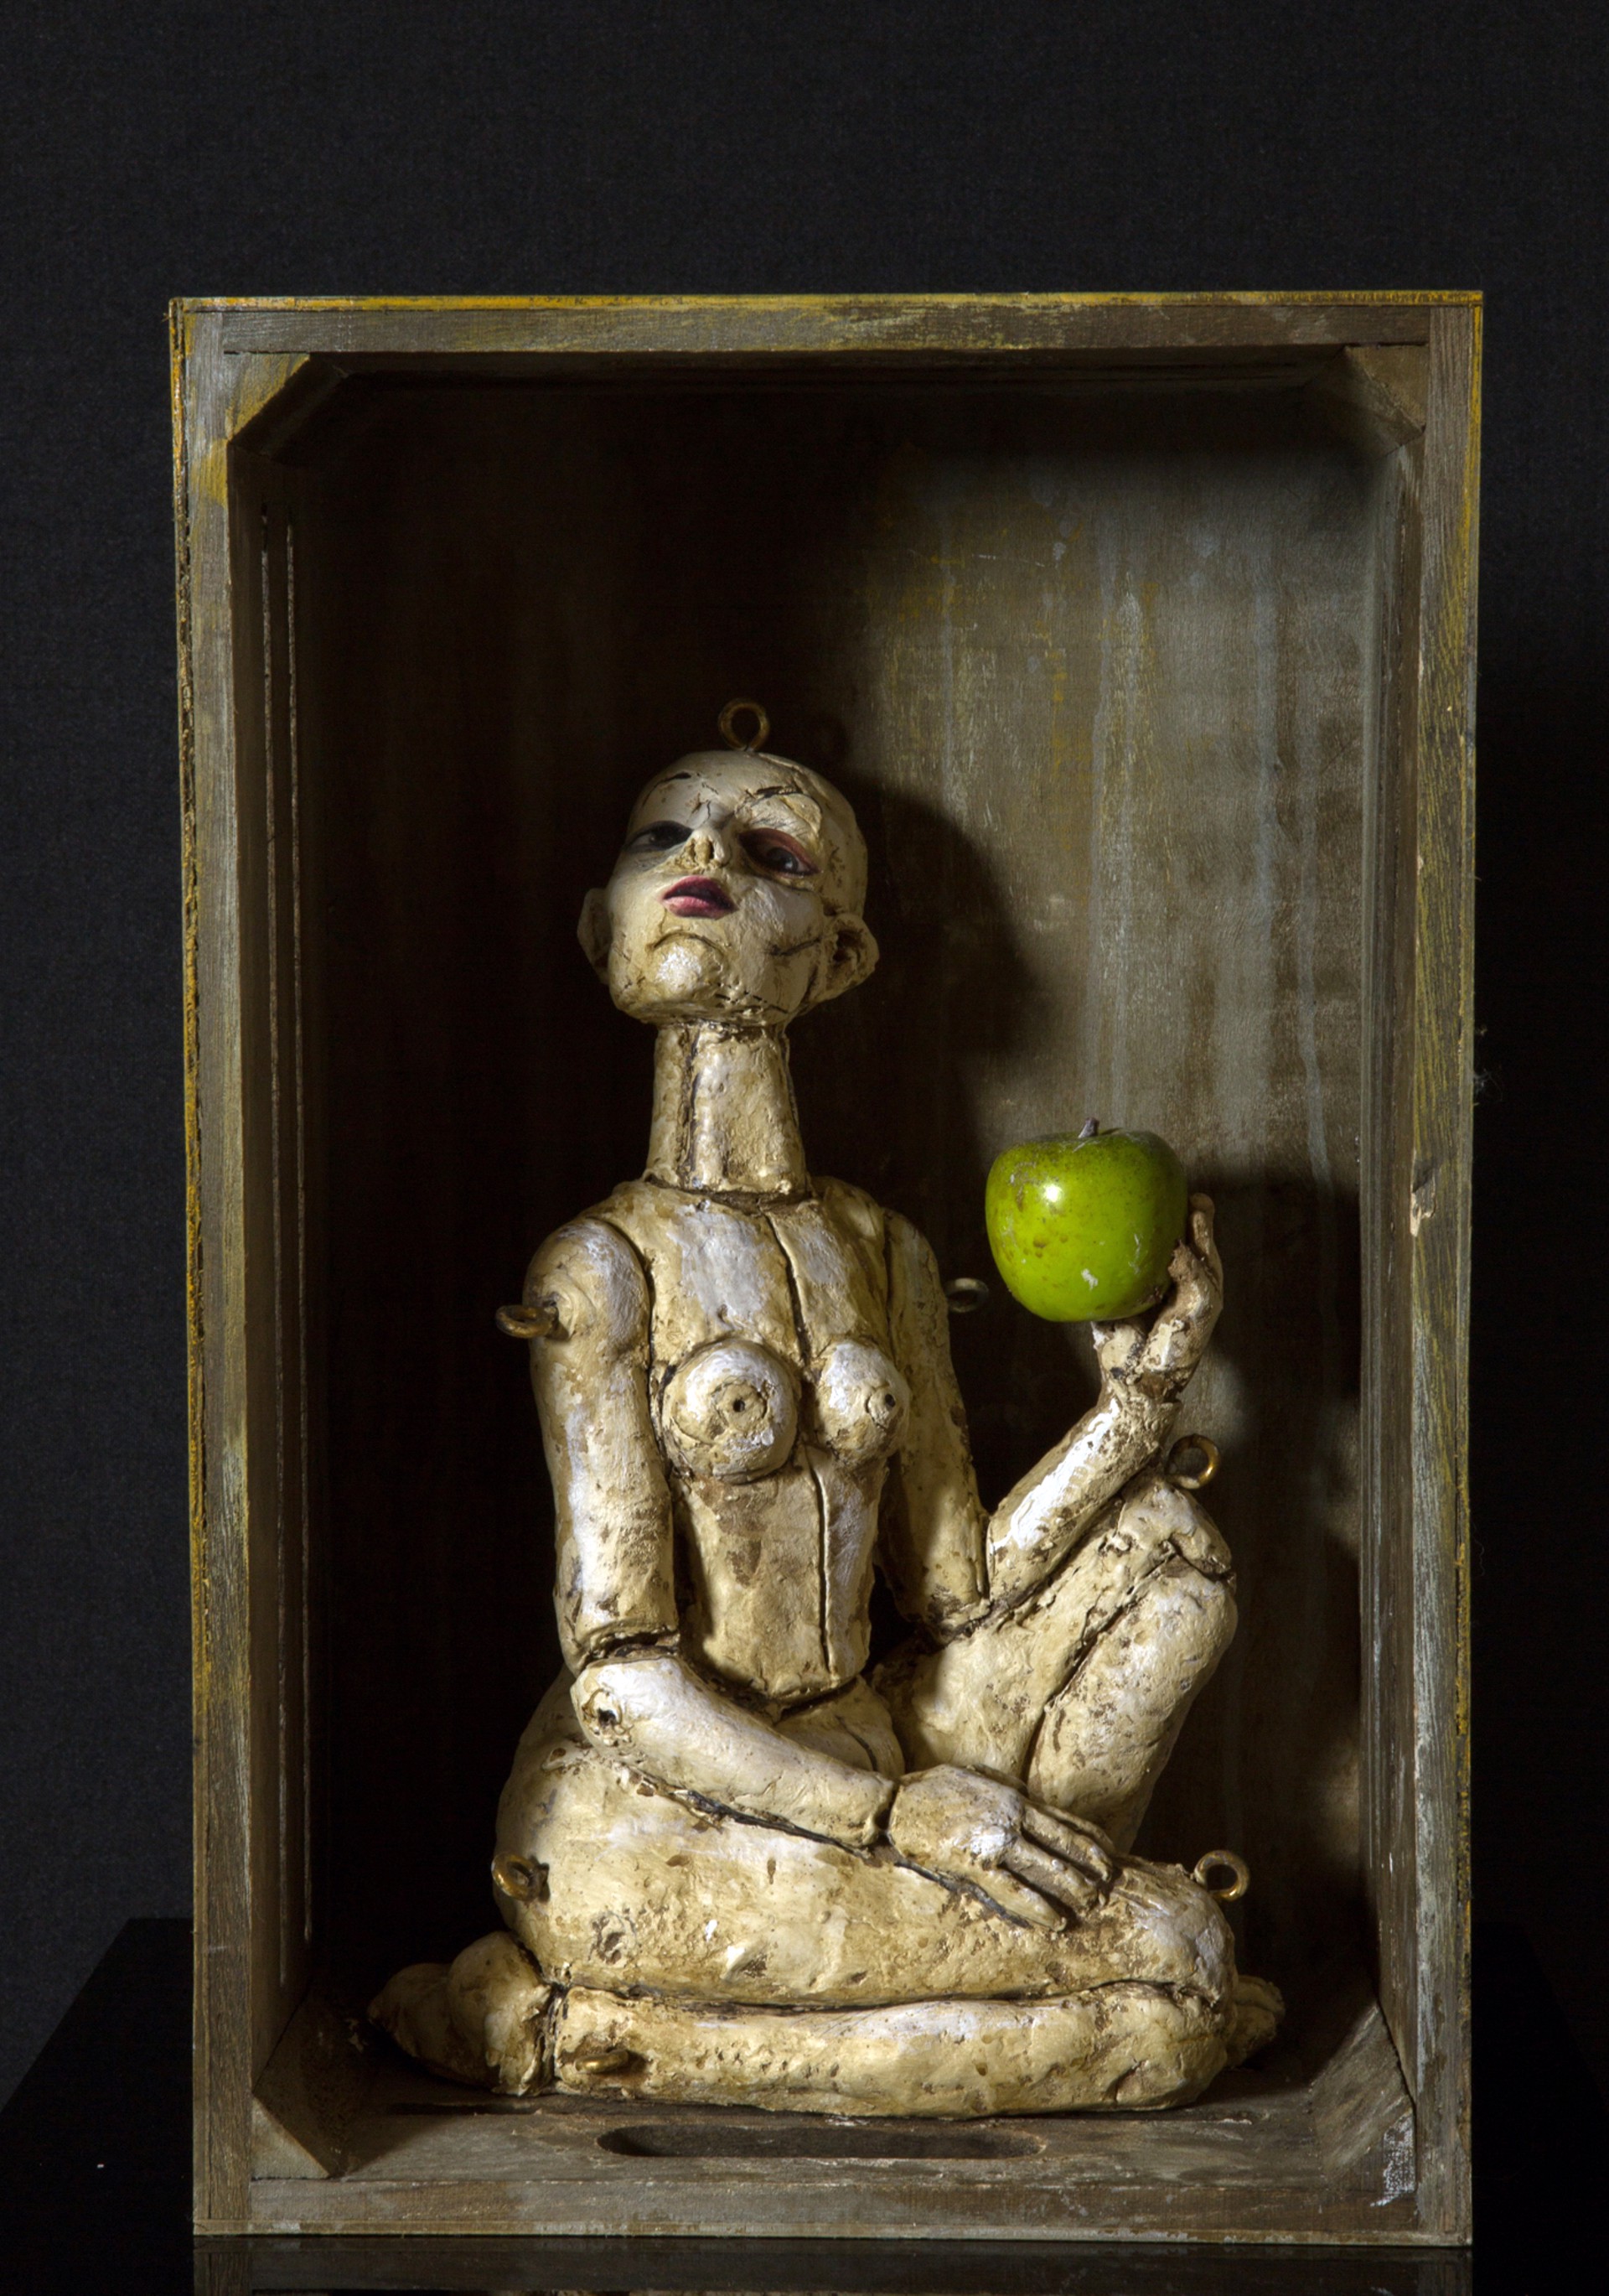 Eve in Isolation by Alla Goniodsky